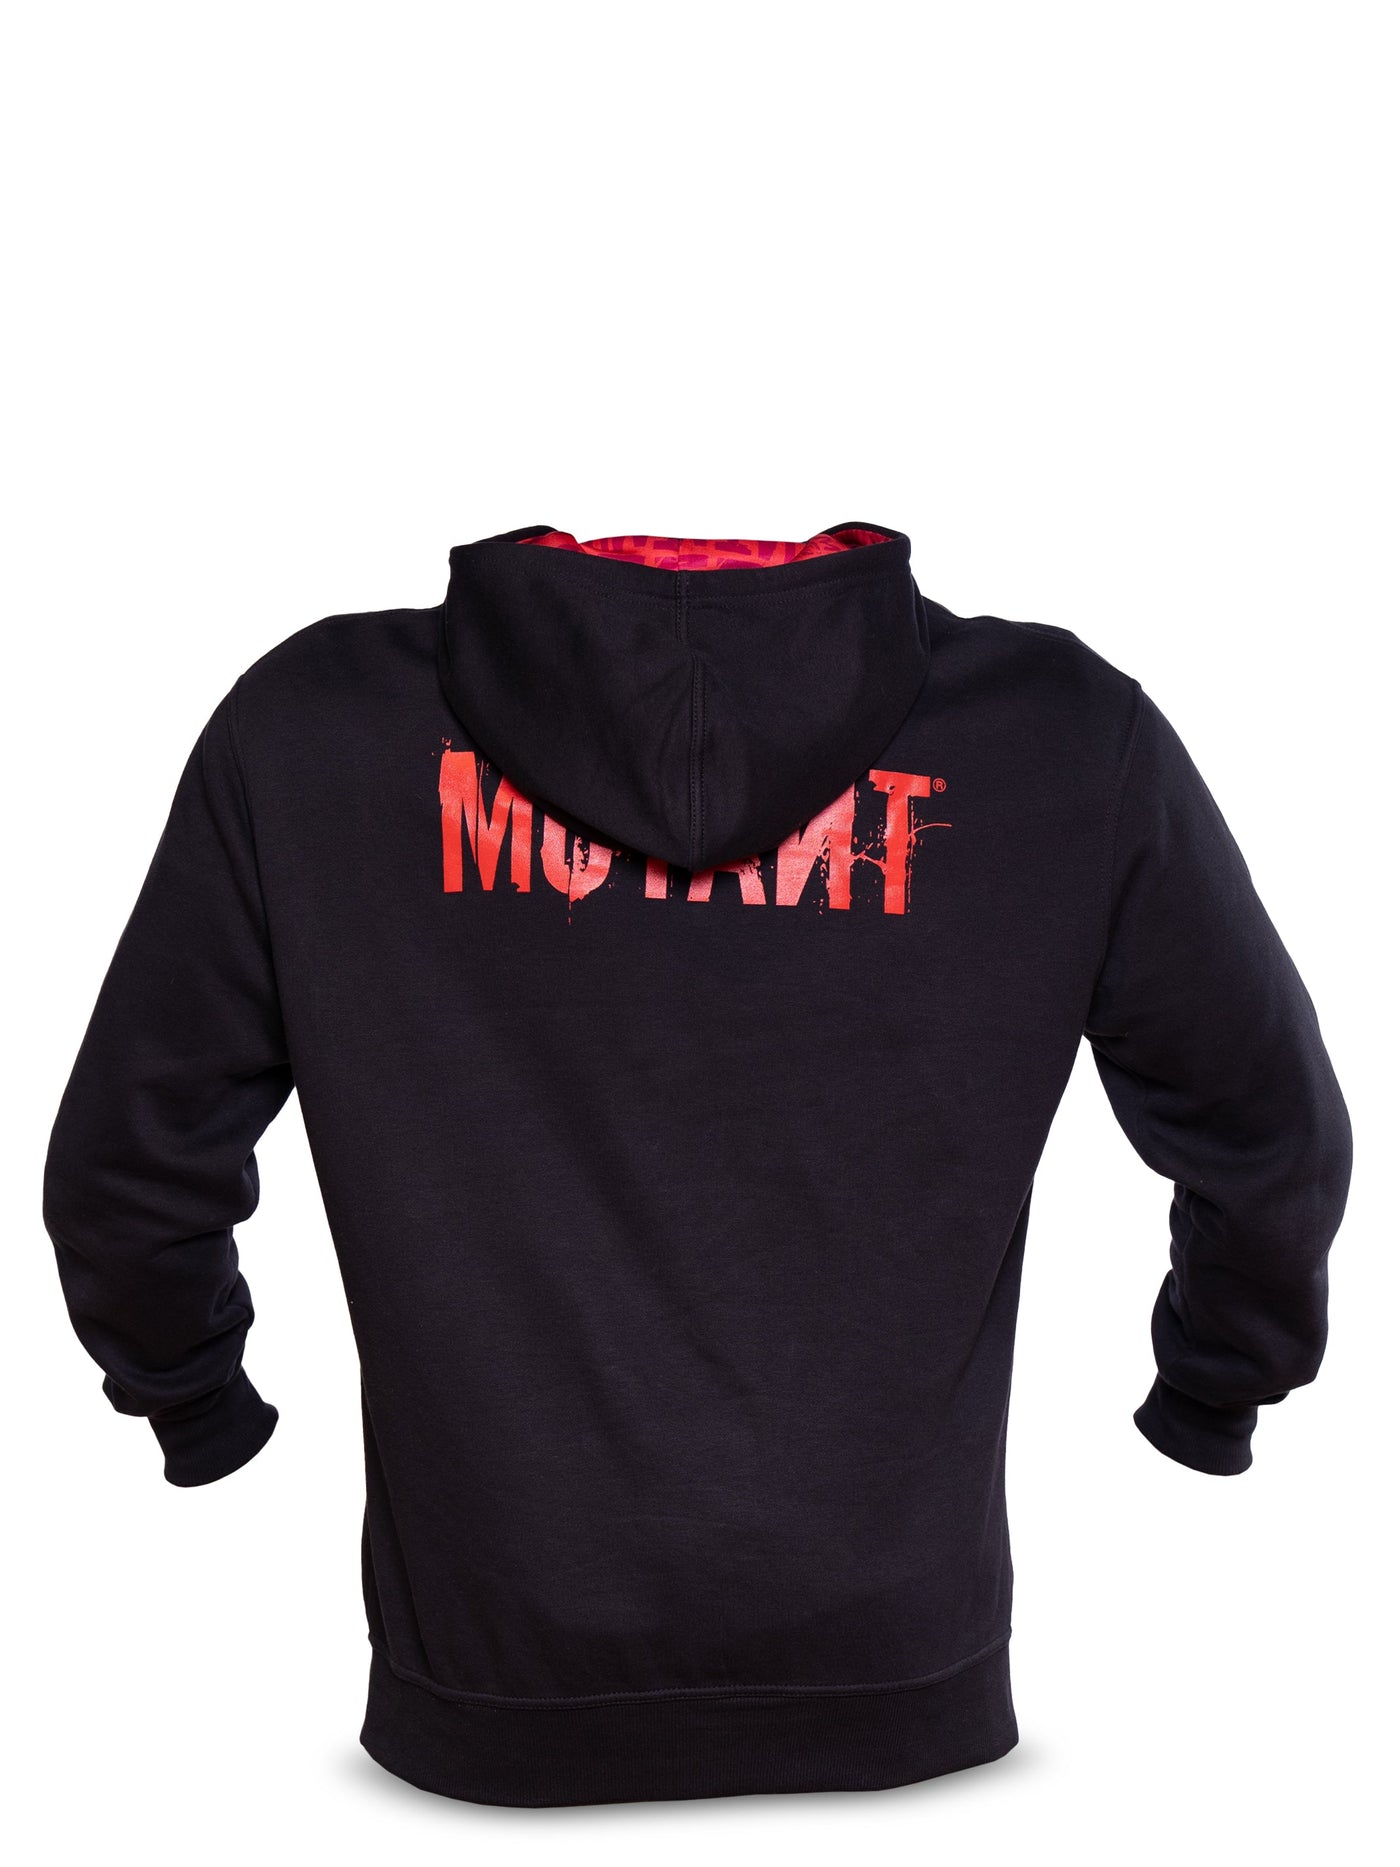 Back view of Black Mutant Patched Zip-Up Gym Hoodie featuring a red Mutant logo on the back. White background.